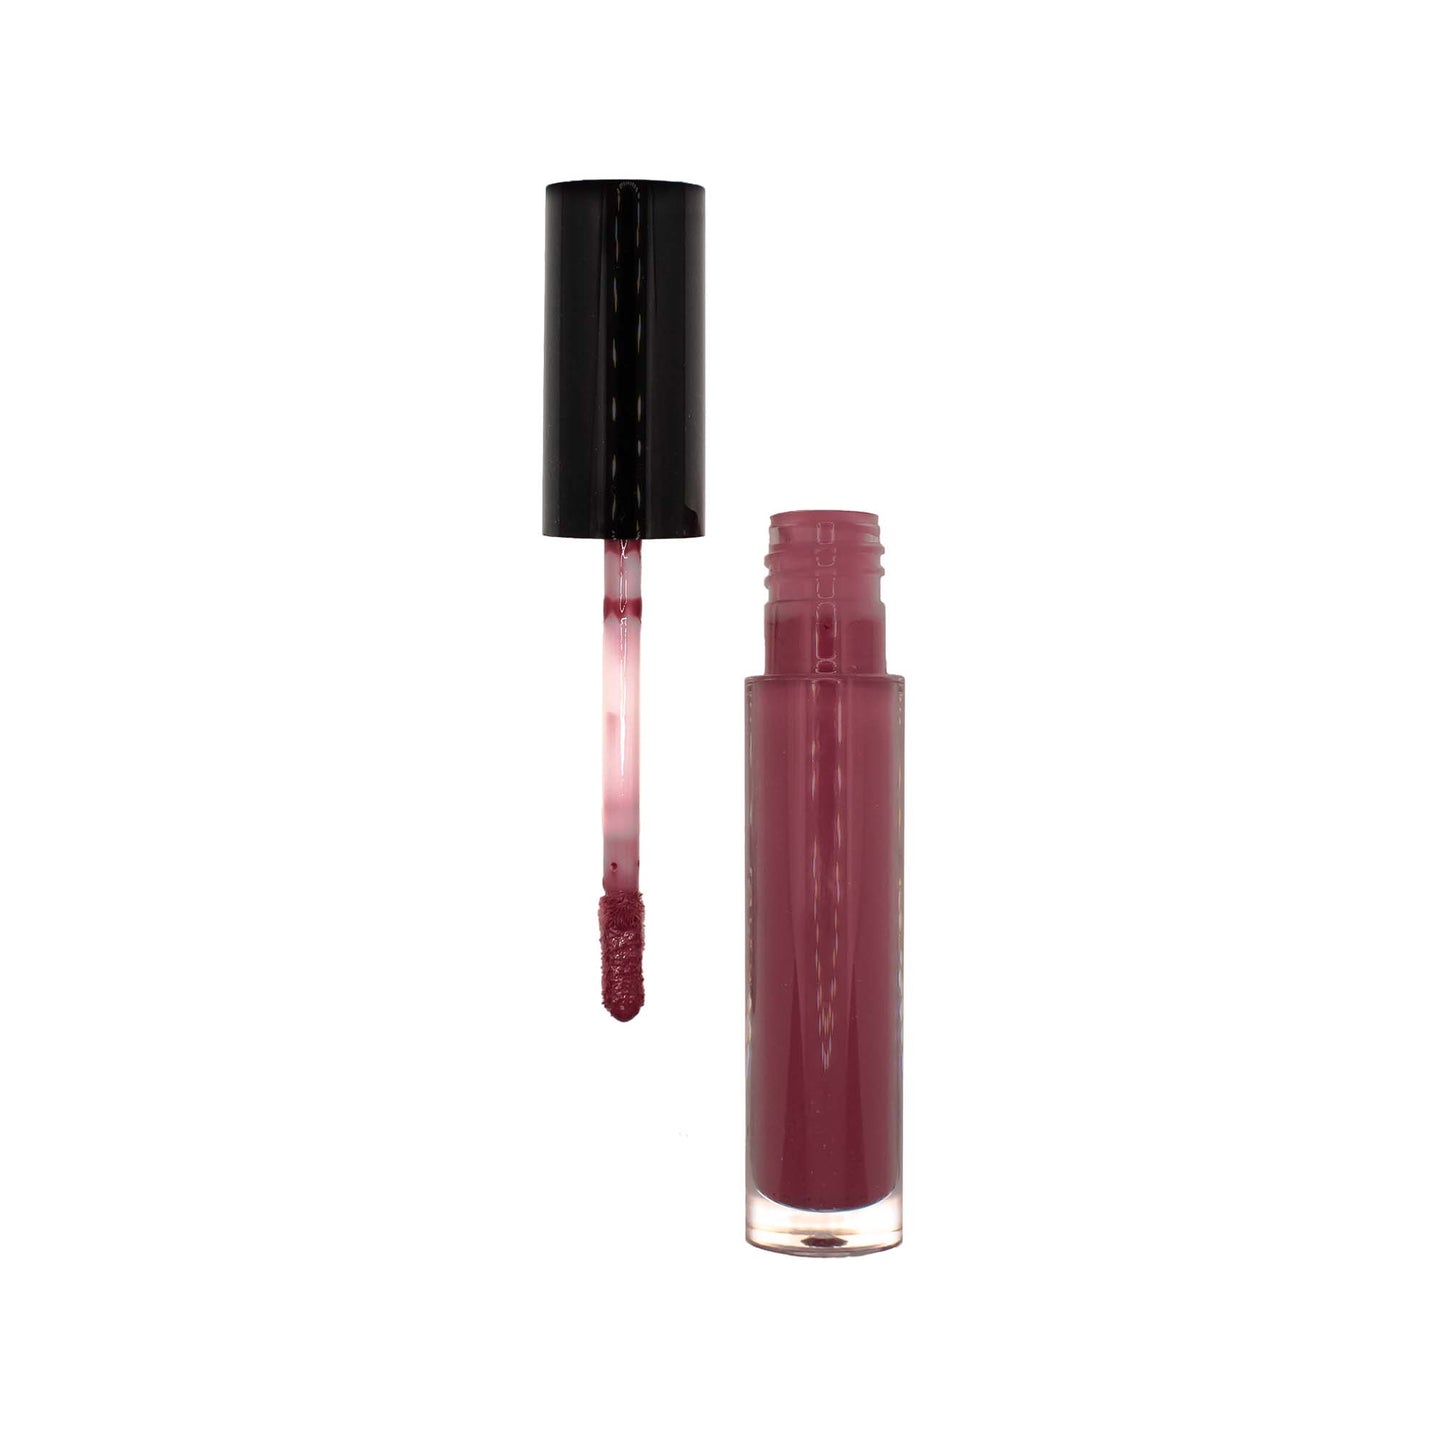 Enhance your lips with Cruisin Orga Bare liquid lip gloss. With long-lasting formula and shimmer or natural finishes, this gloss adds pigment and shine for fuller, illuminated lips. Get a radiant look all day and night with its sheer tint. Try it now!